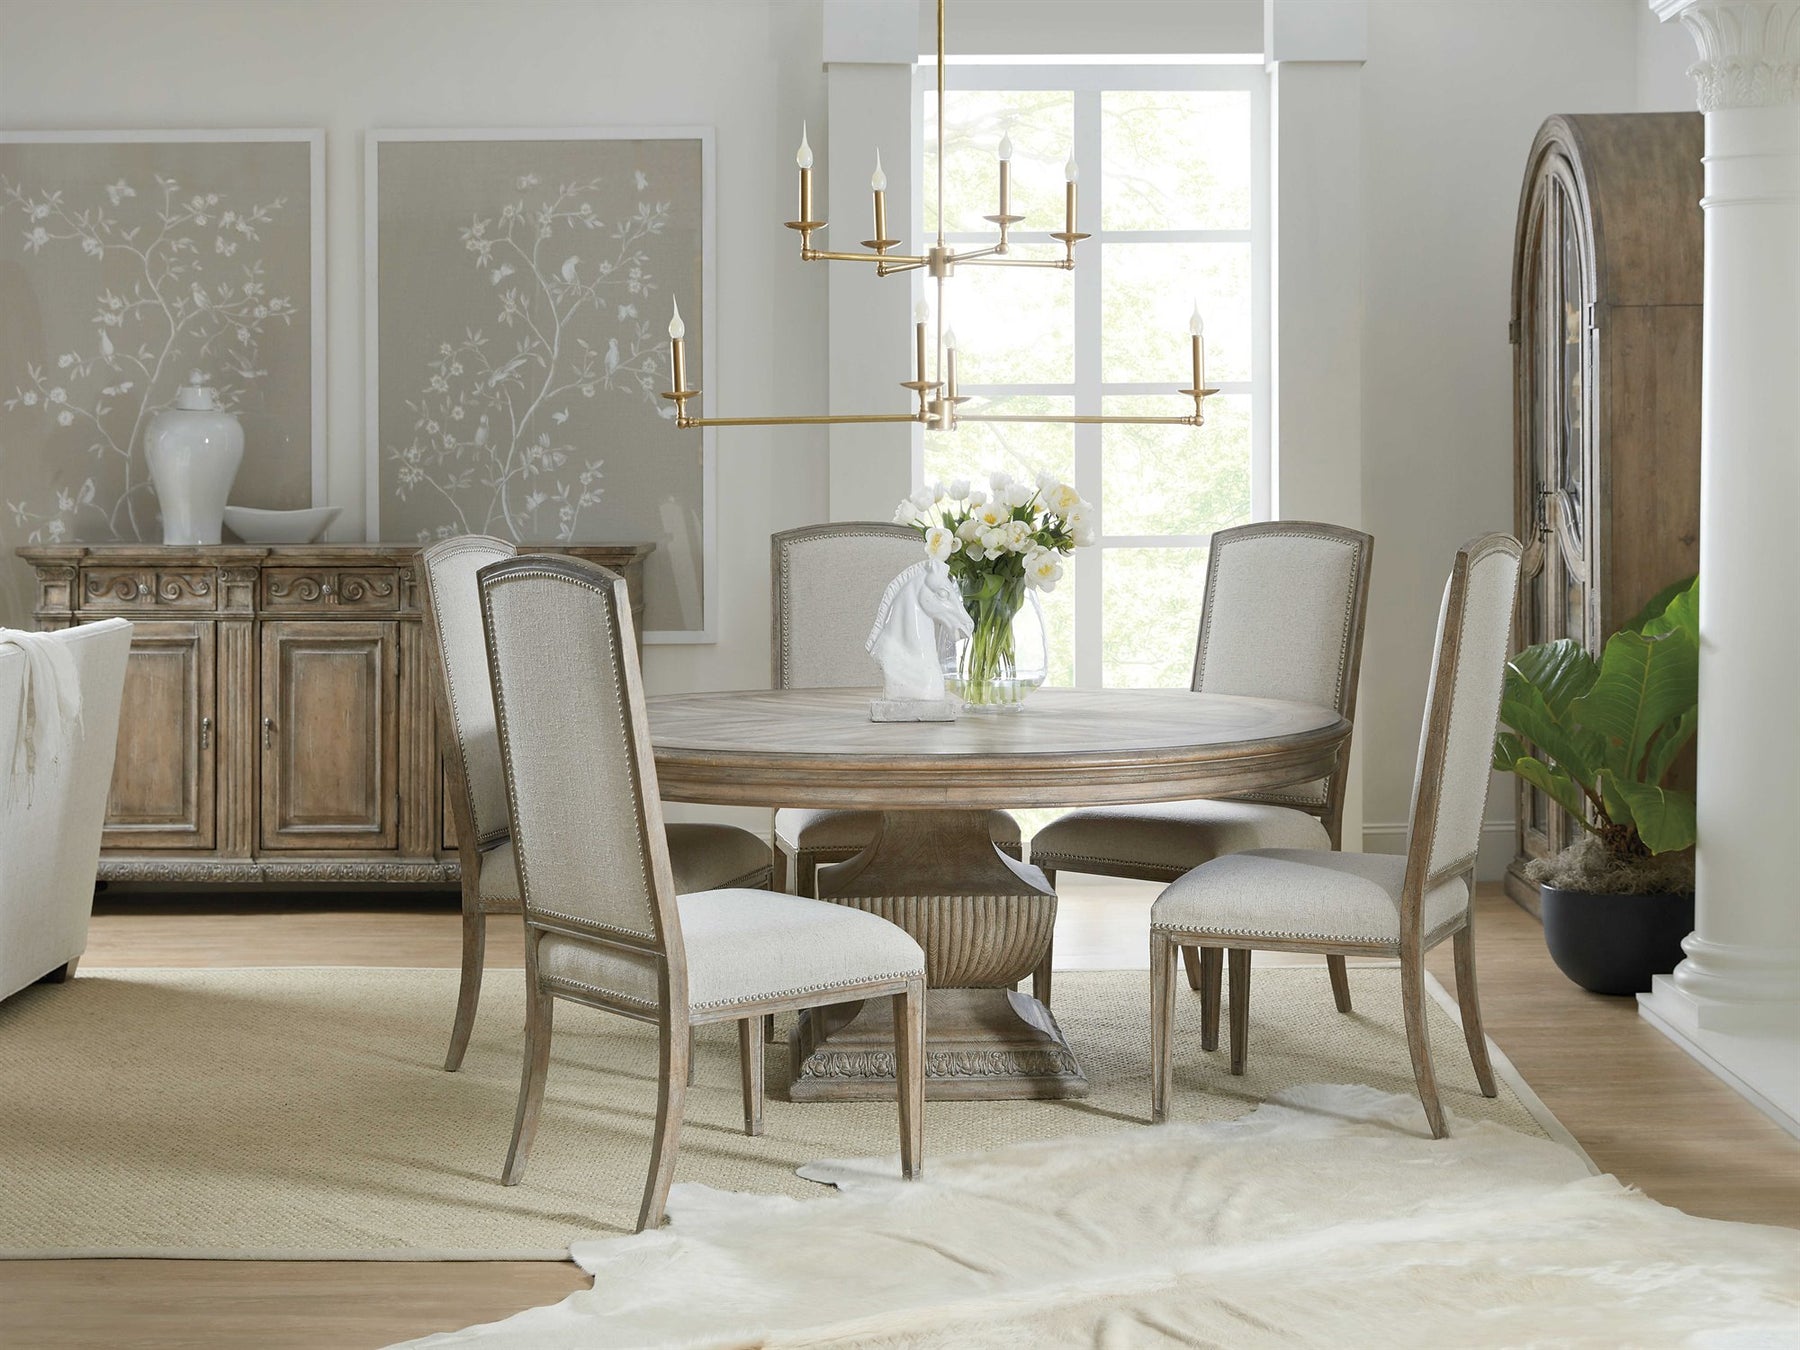 Timeless Designs for a Stylish Dining Experience